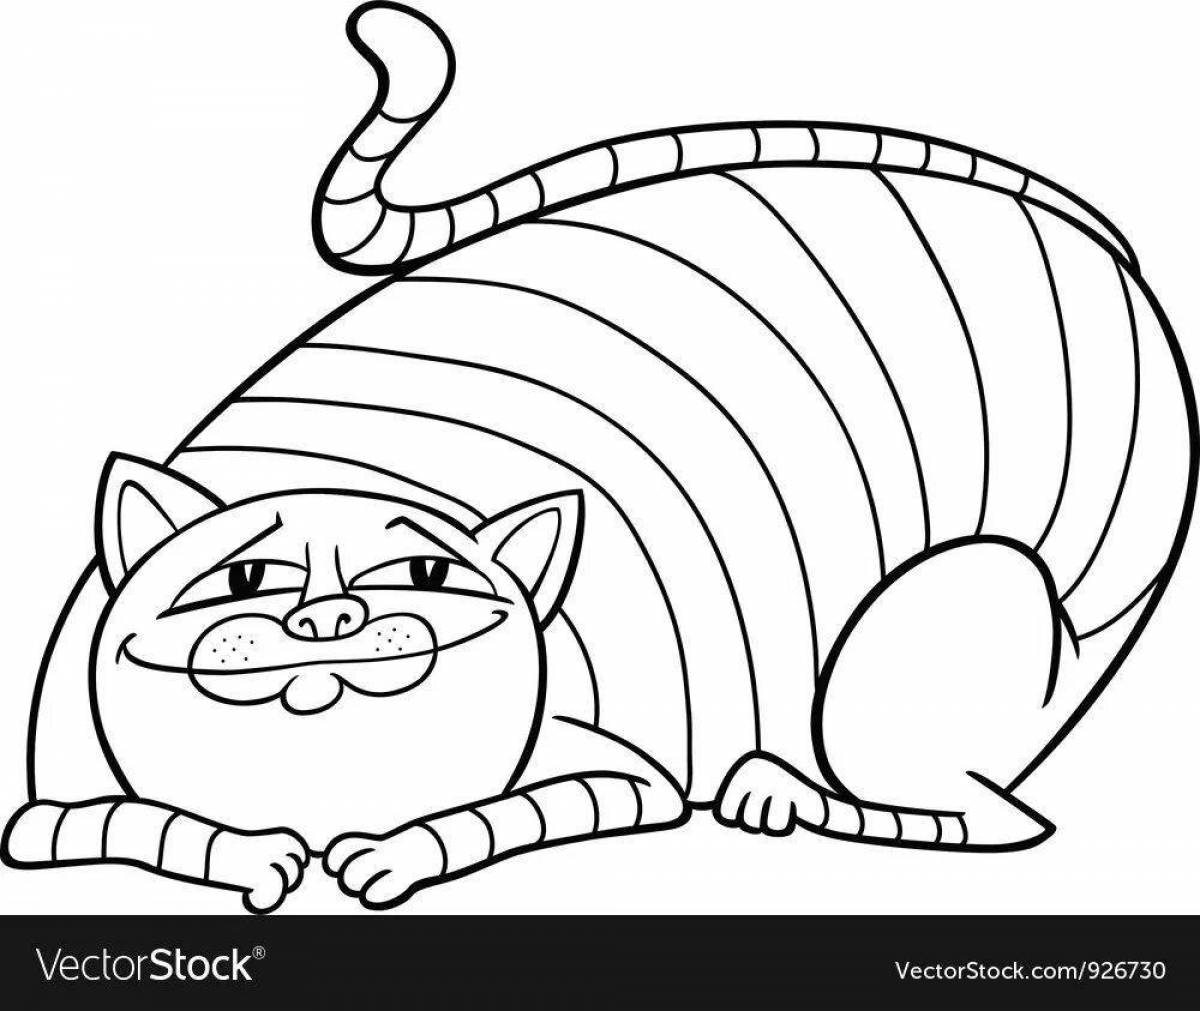 Coloring book fluffy fat cat